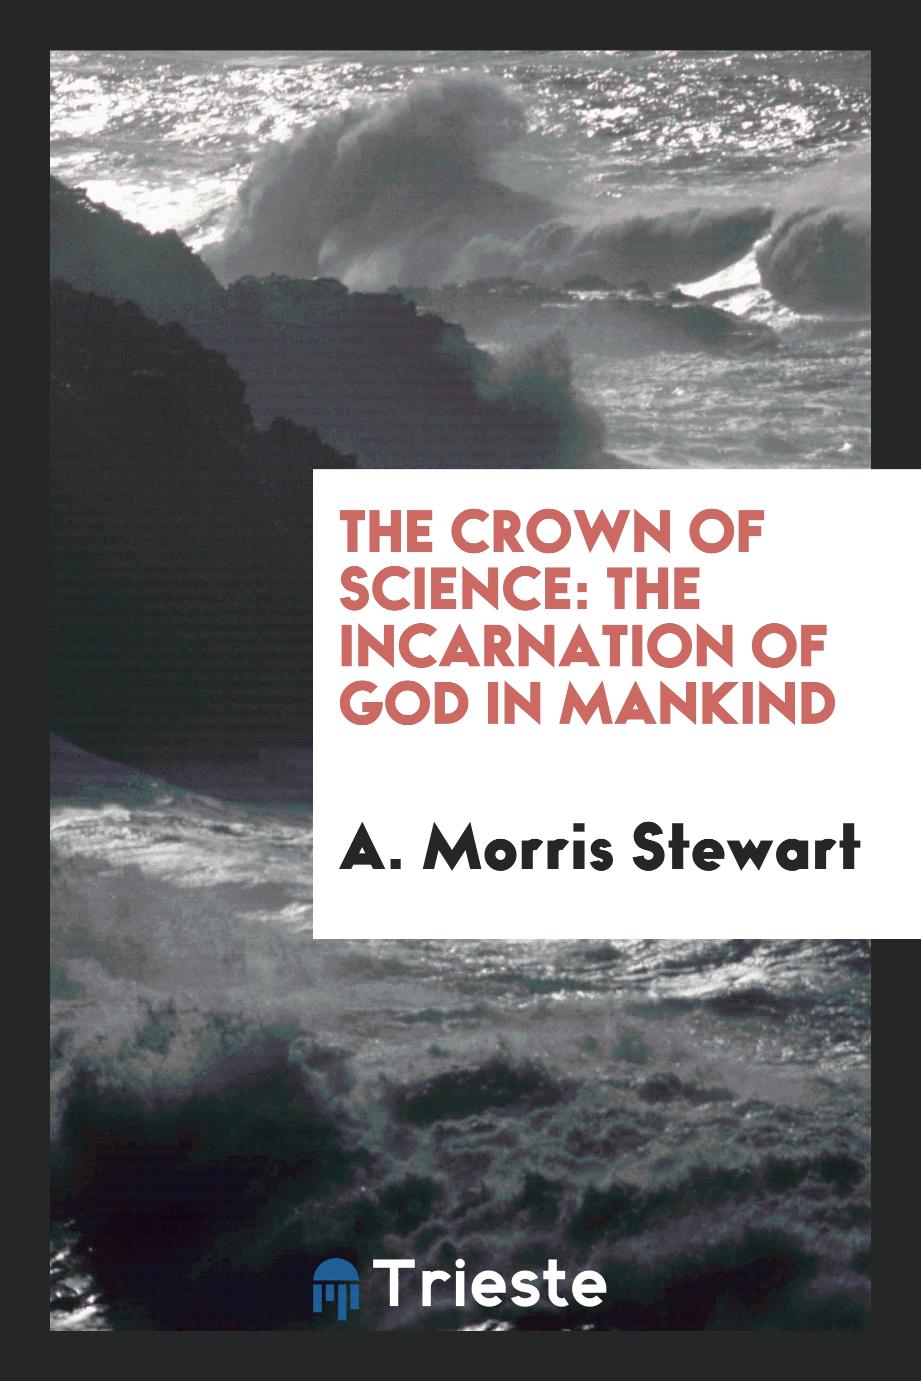 The crown of science: the incarnation of God in mankind